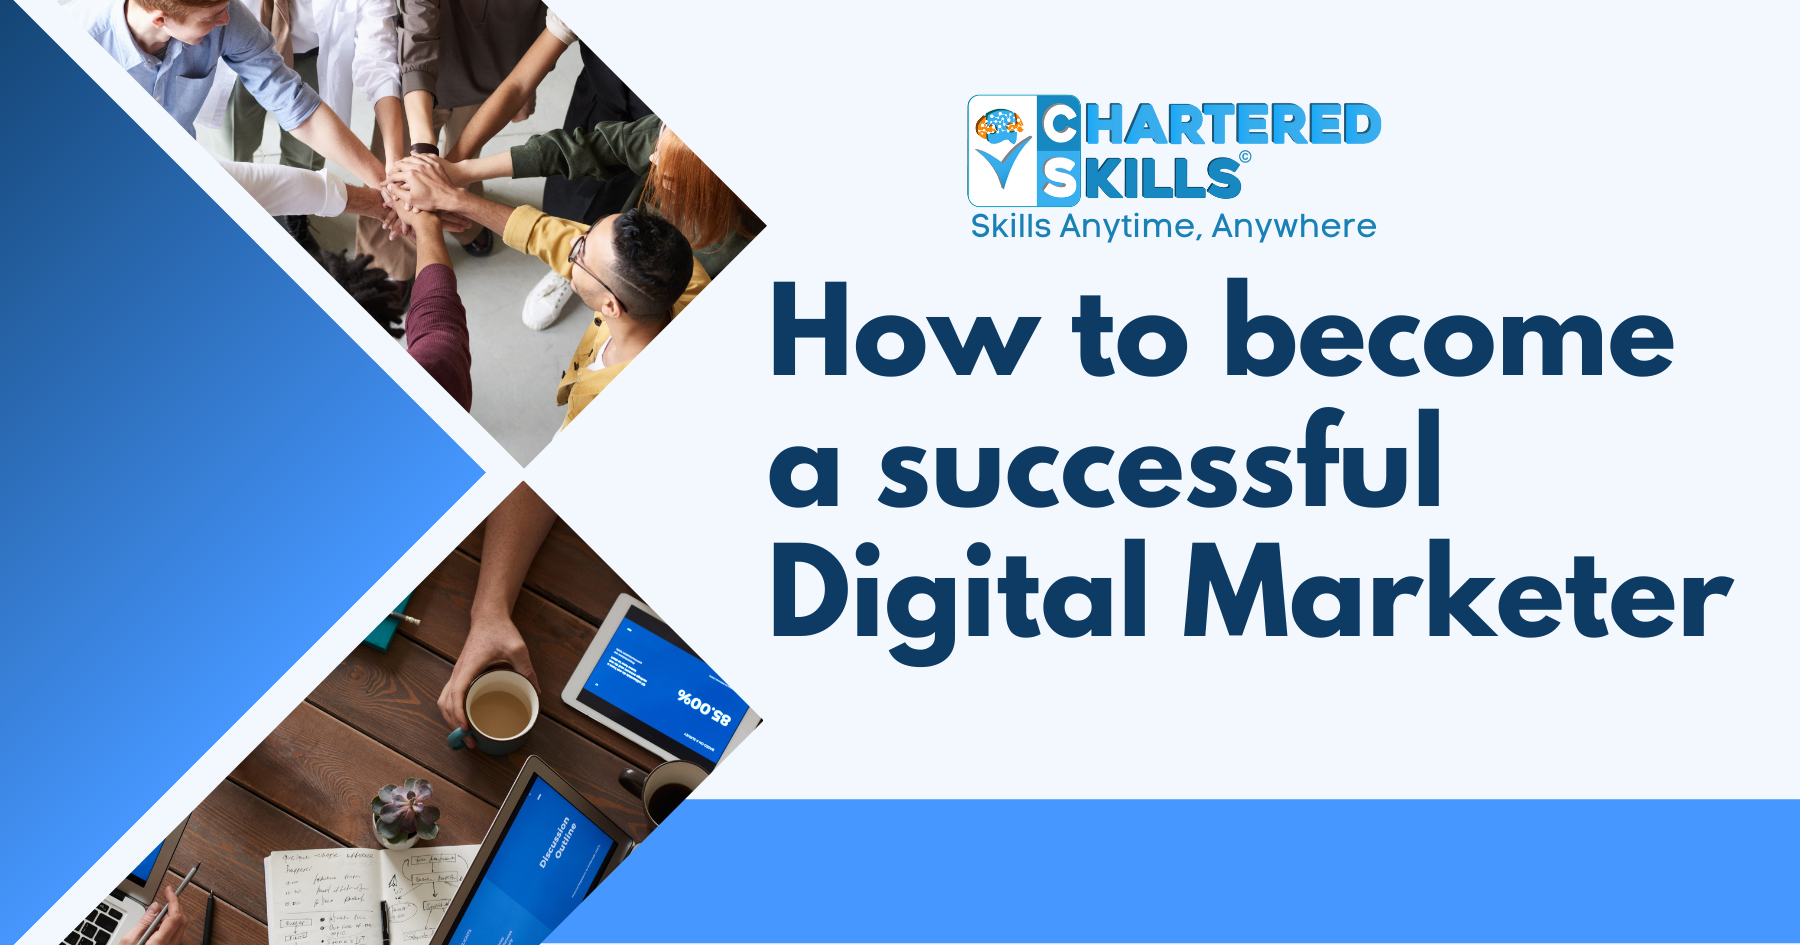 How to become a successful Digital Marketer